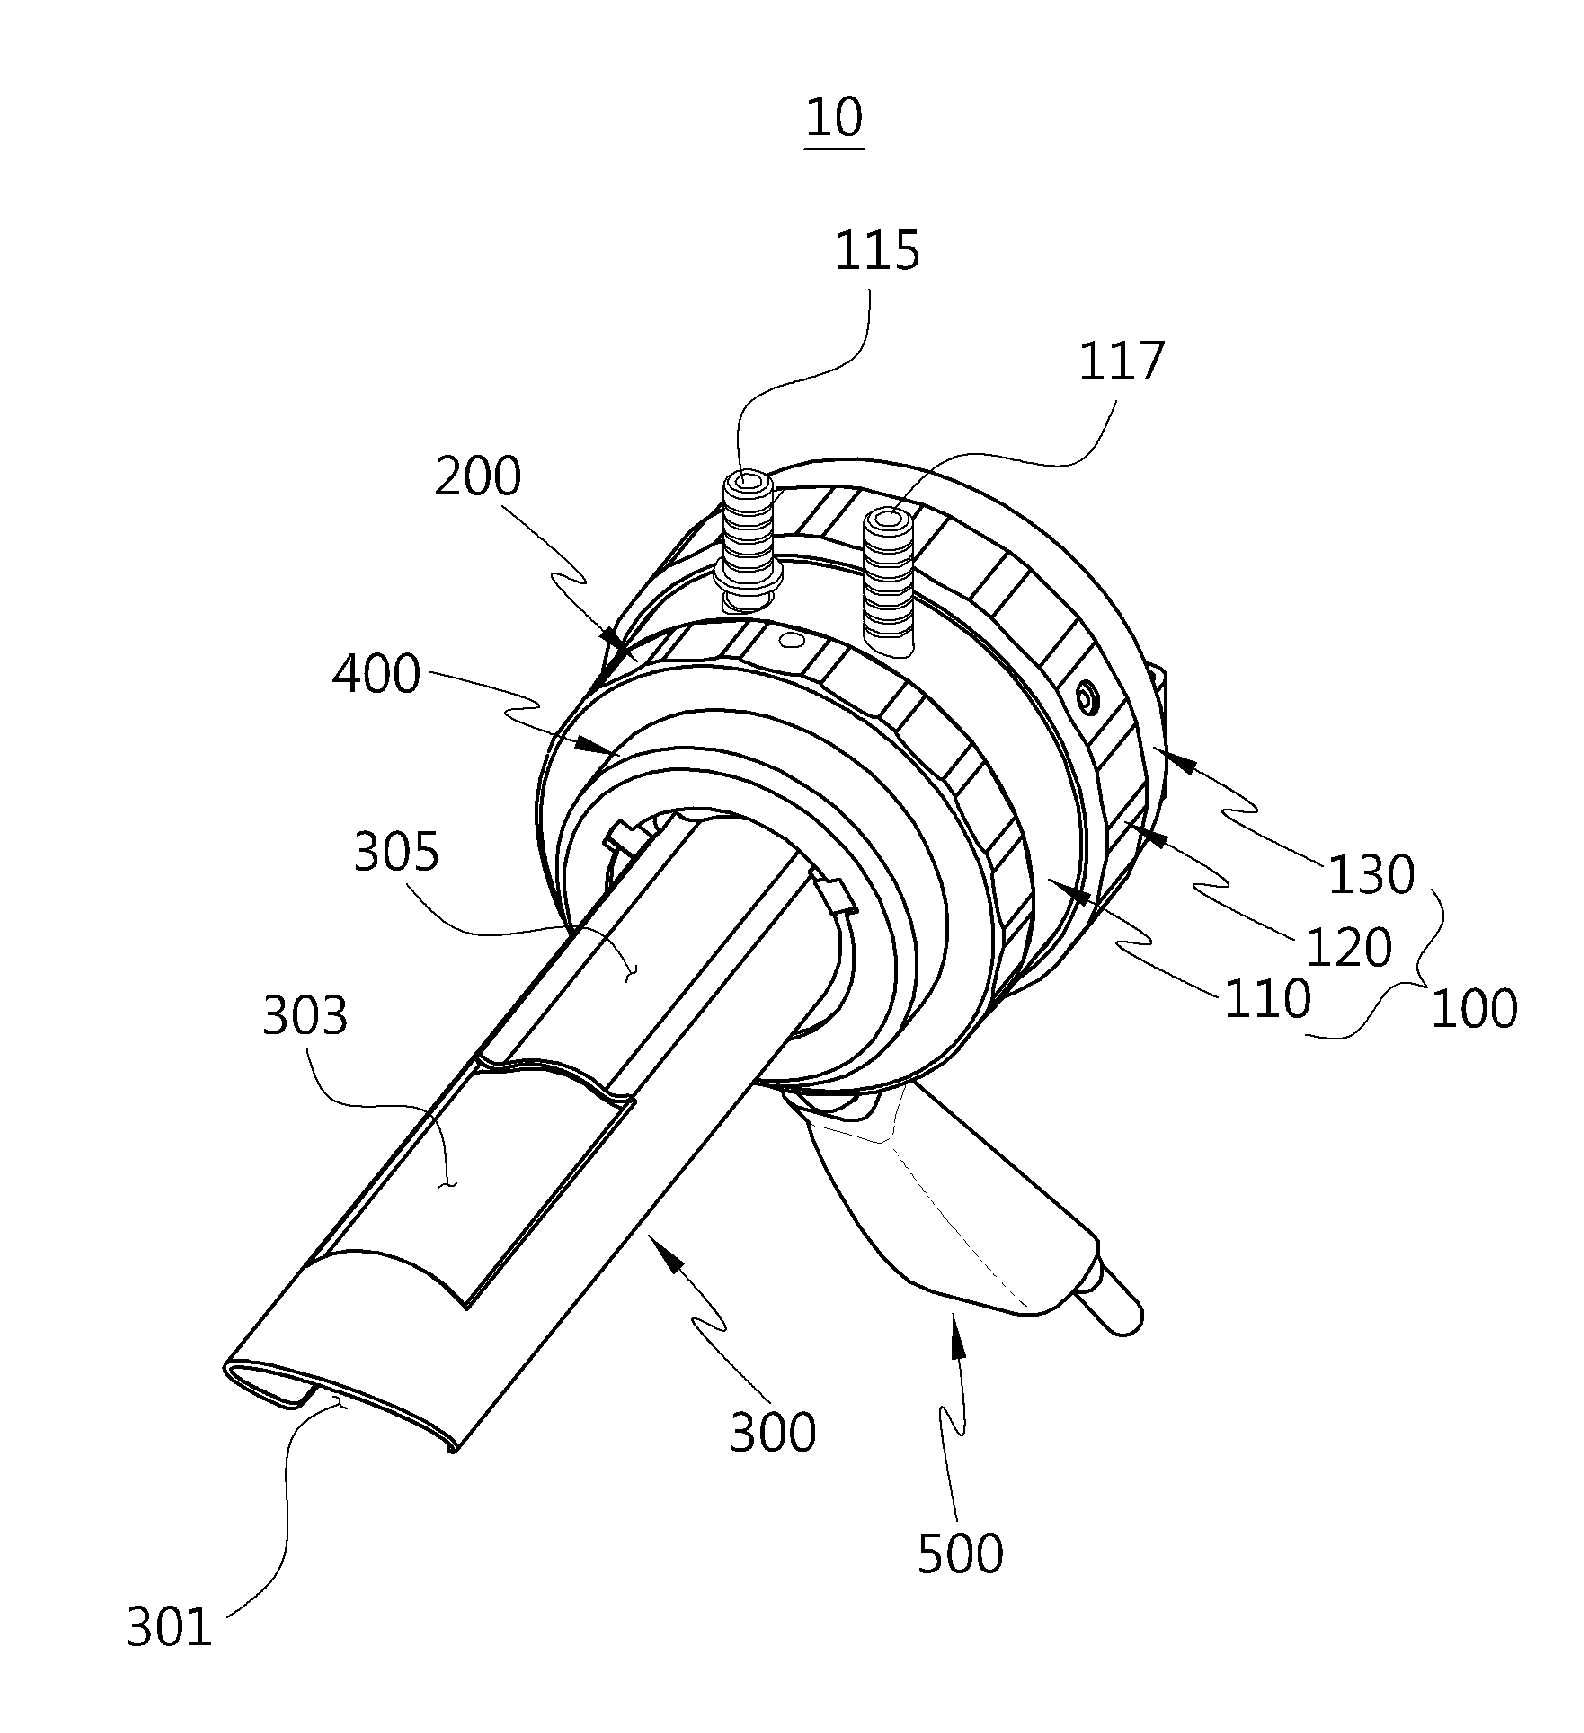 Surgical apparatus for transanal endoscopic microsurgery